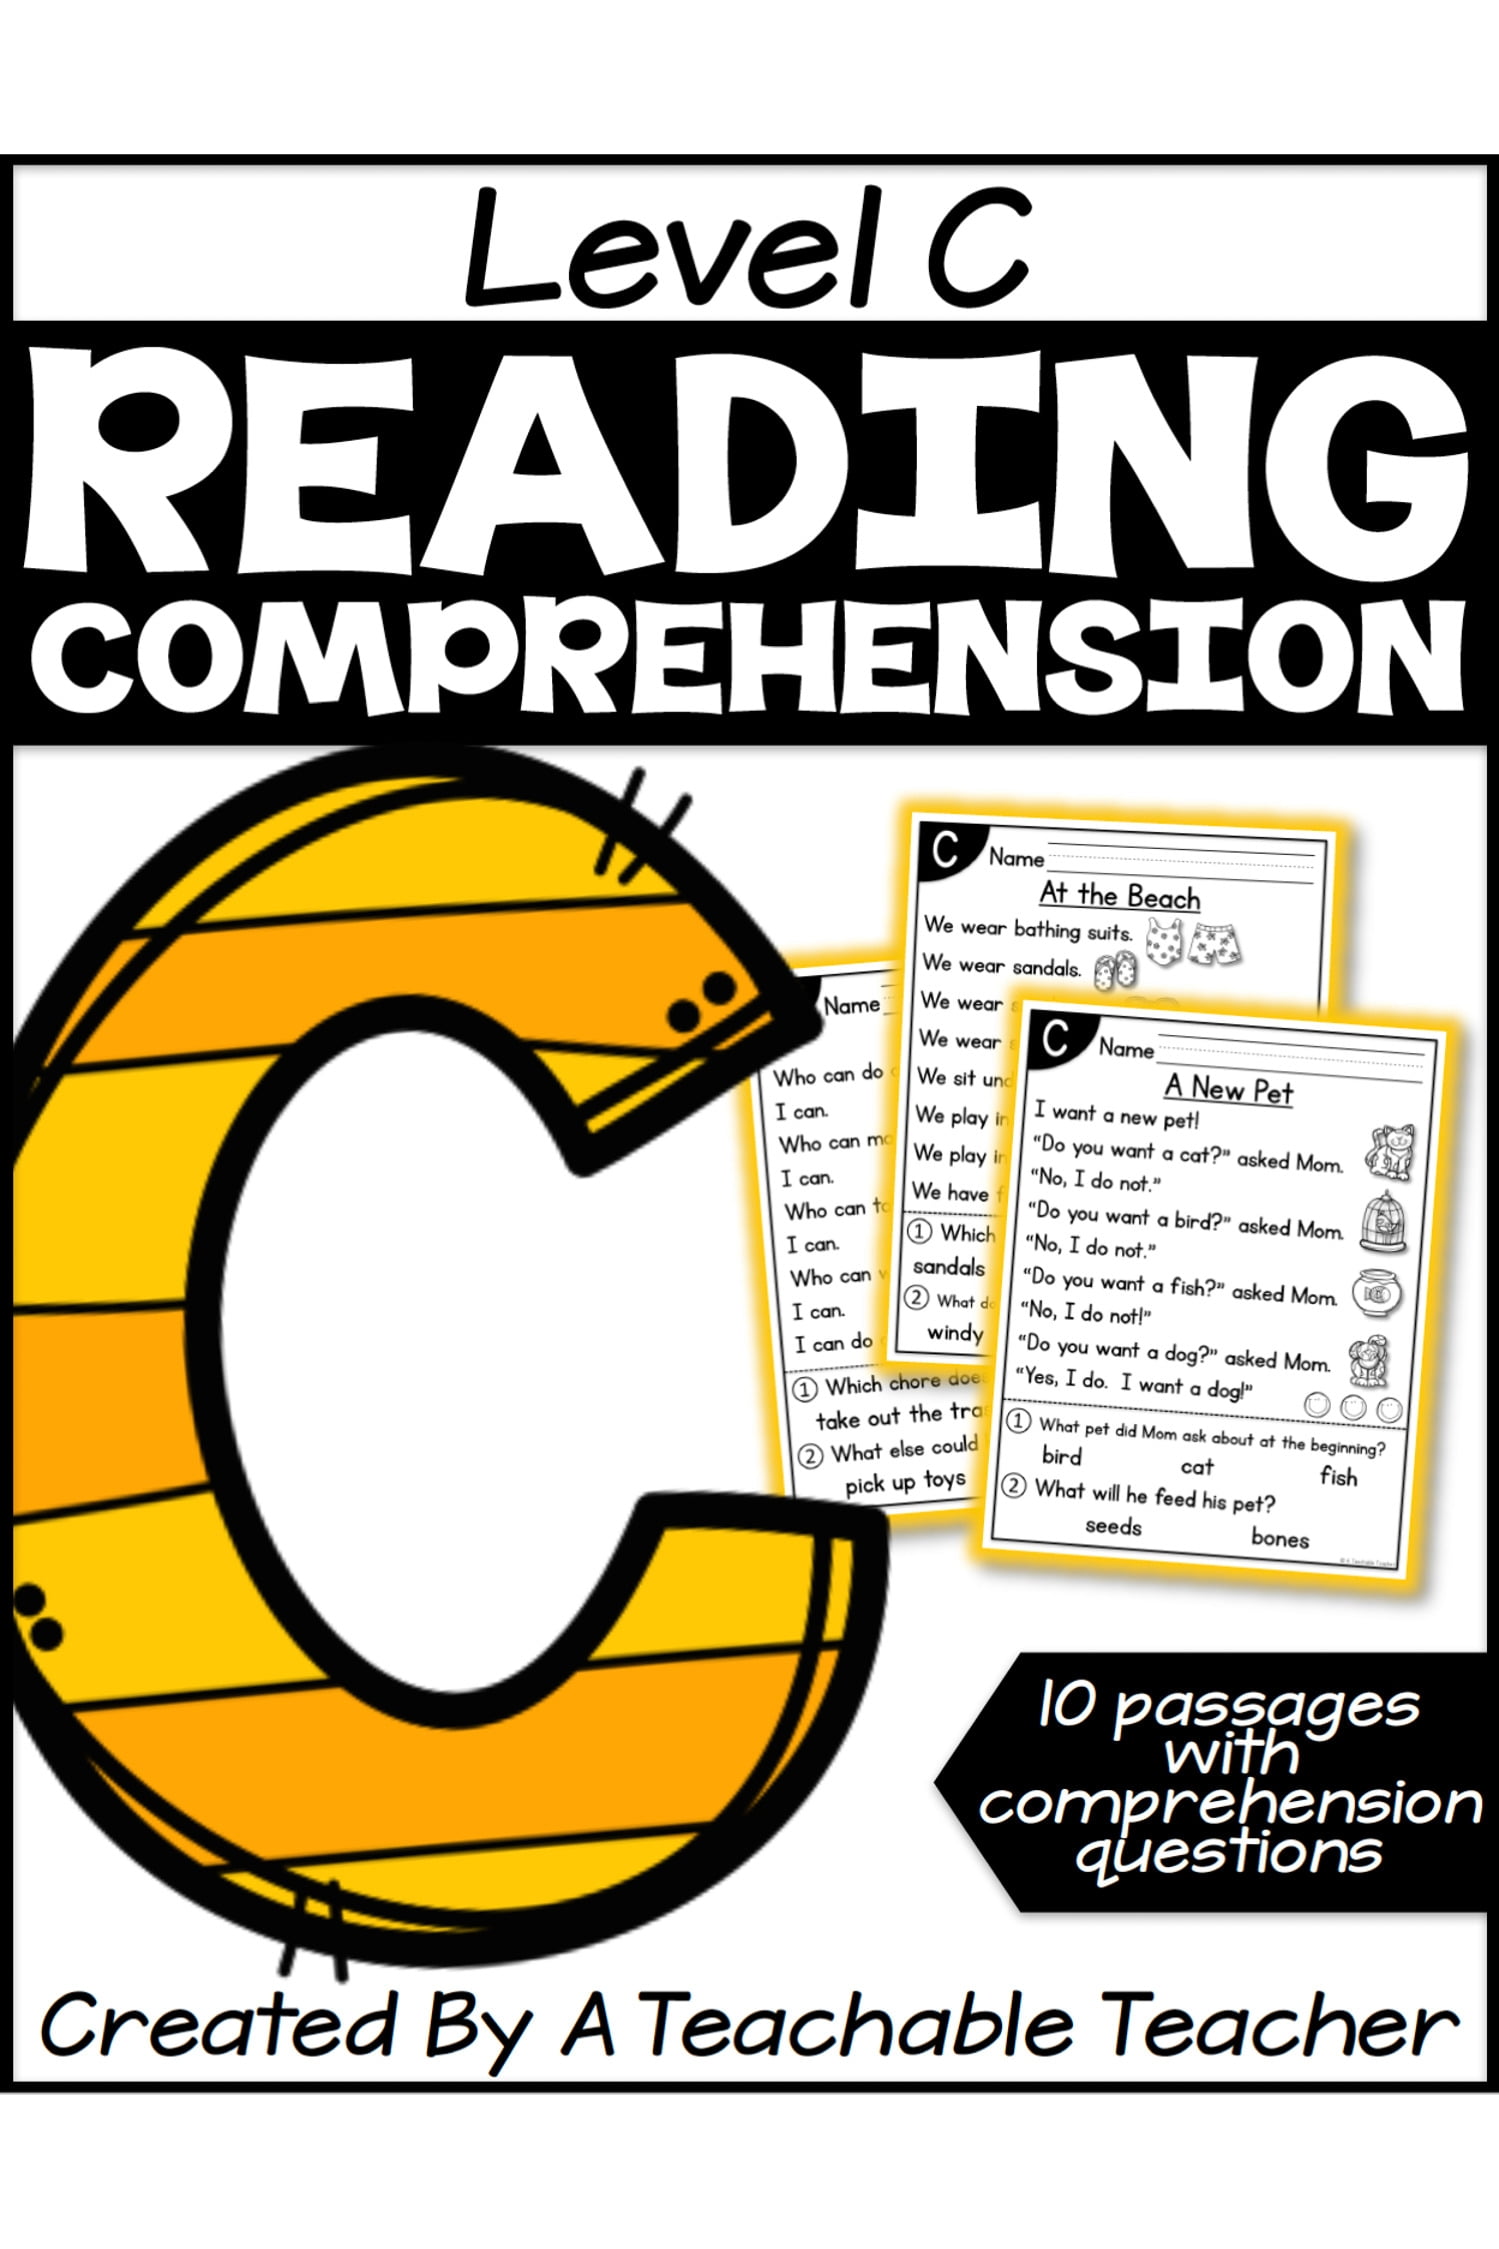 Level C Reading Comprehension Passages And Questions A Teachable Teacher